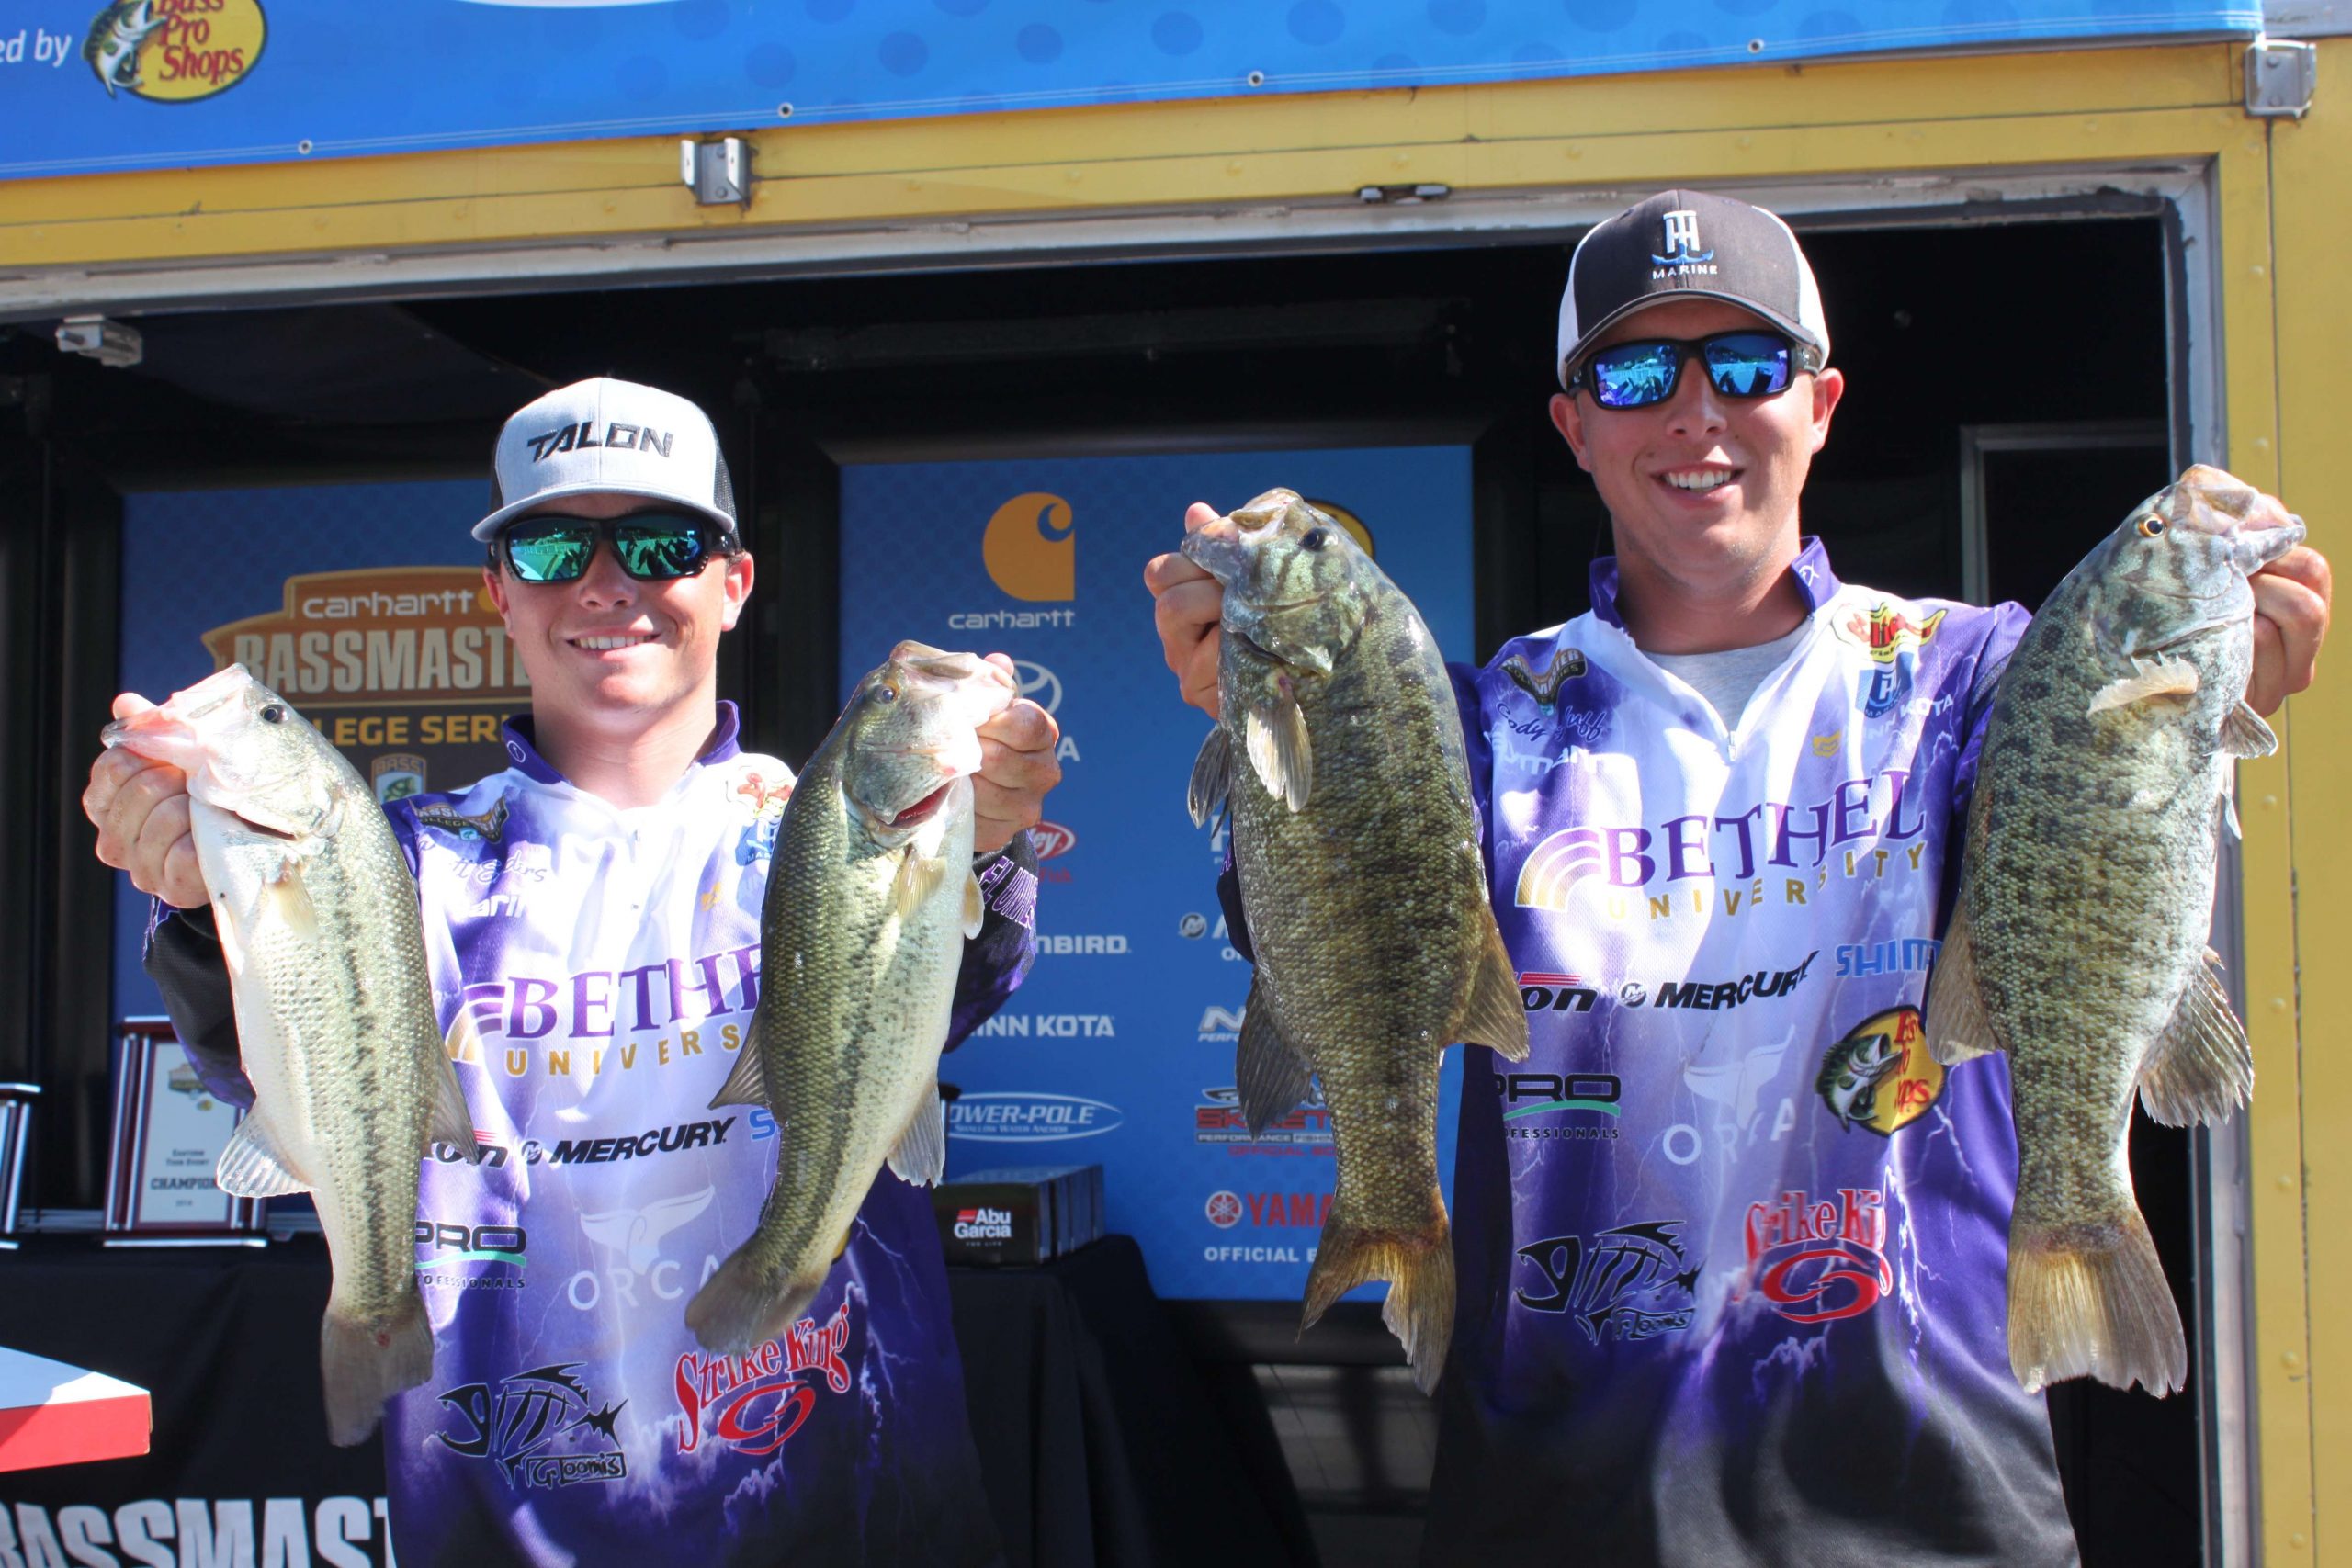 Garrett Enders and Cody Huff of Bethel University placed 16th with 35-13.